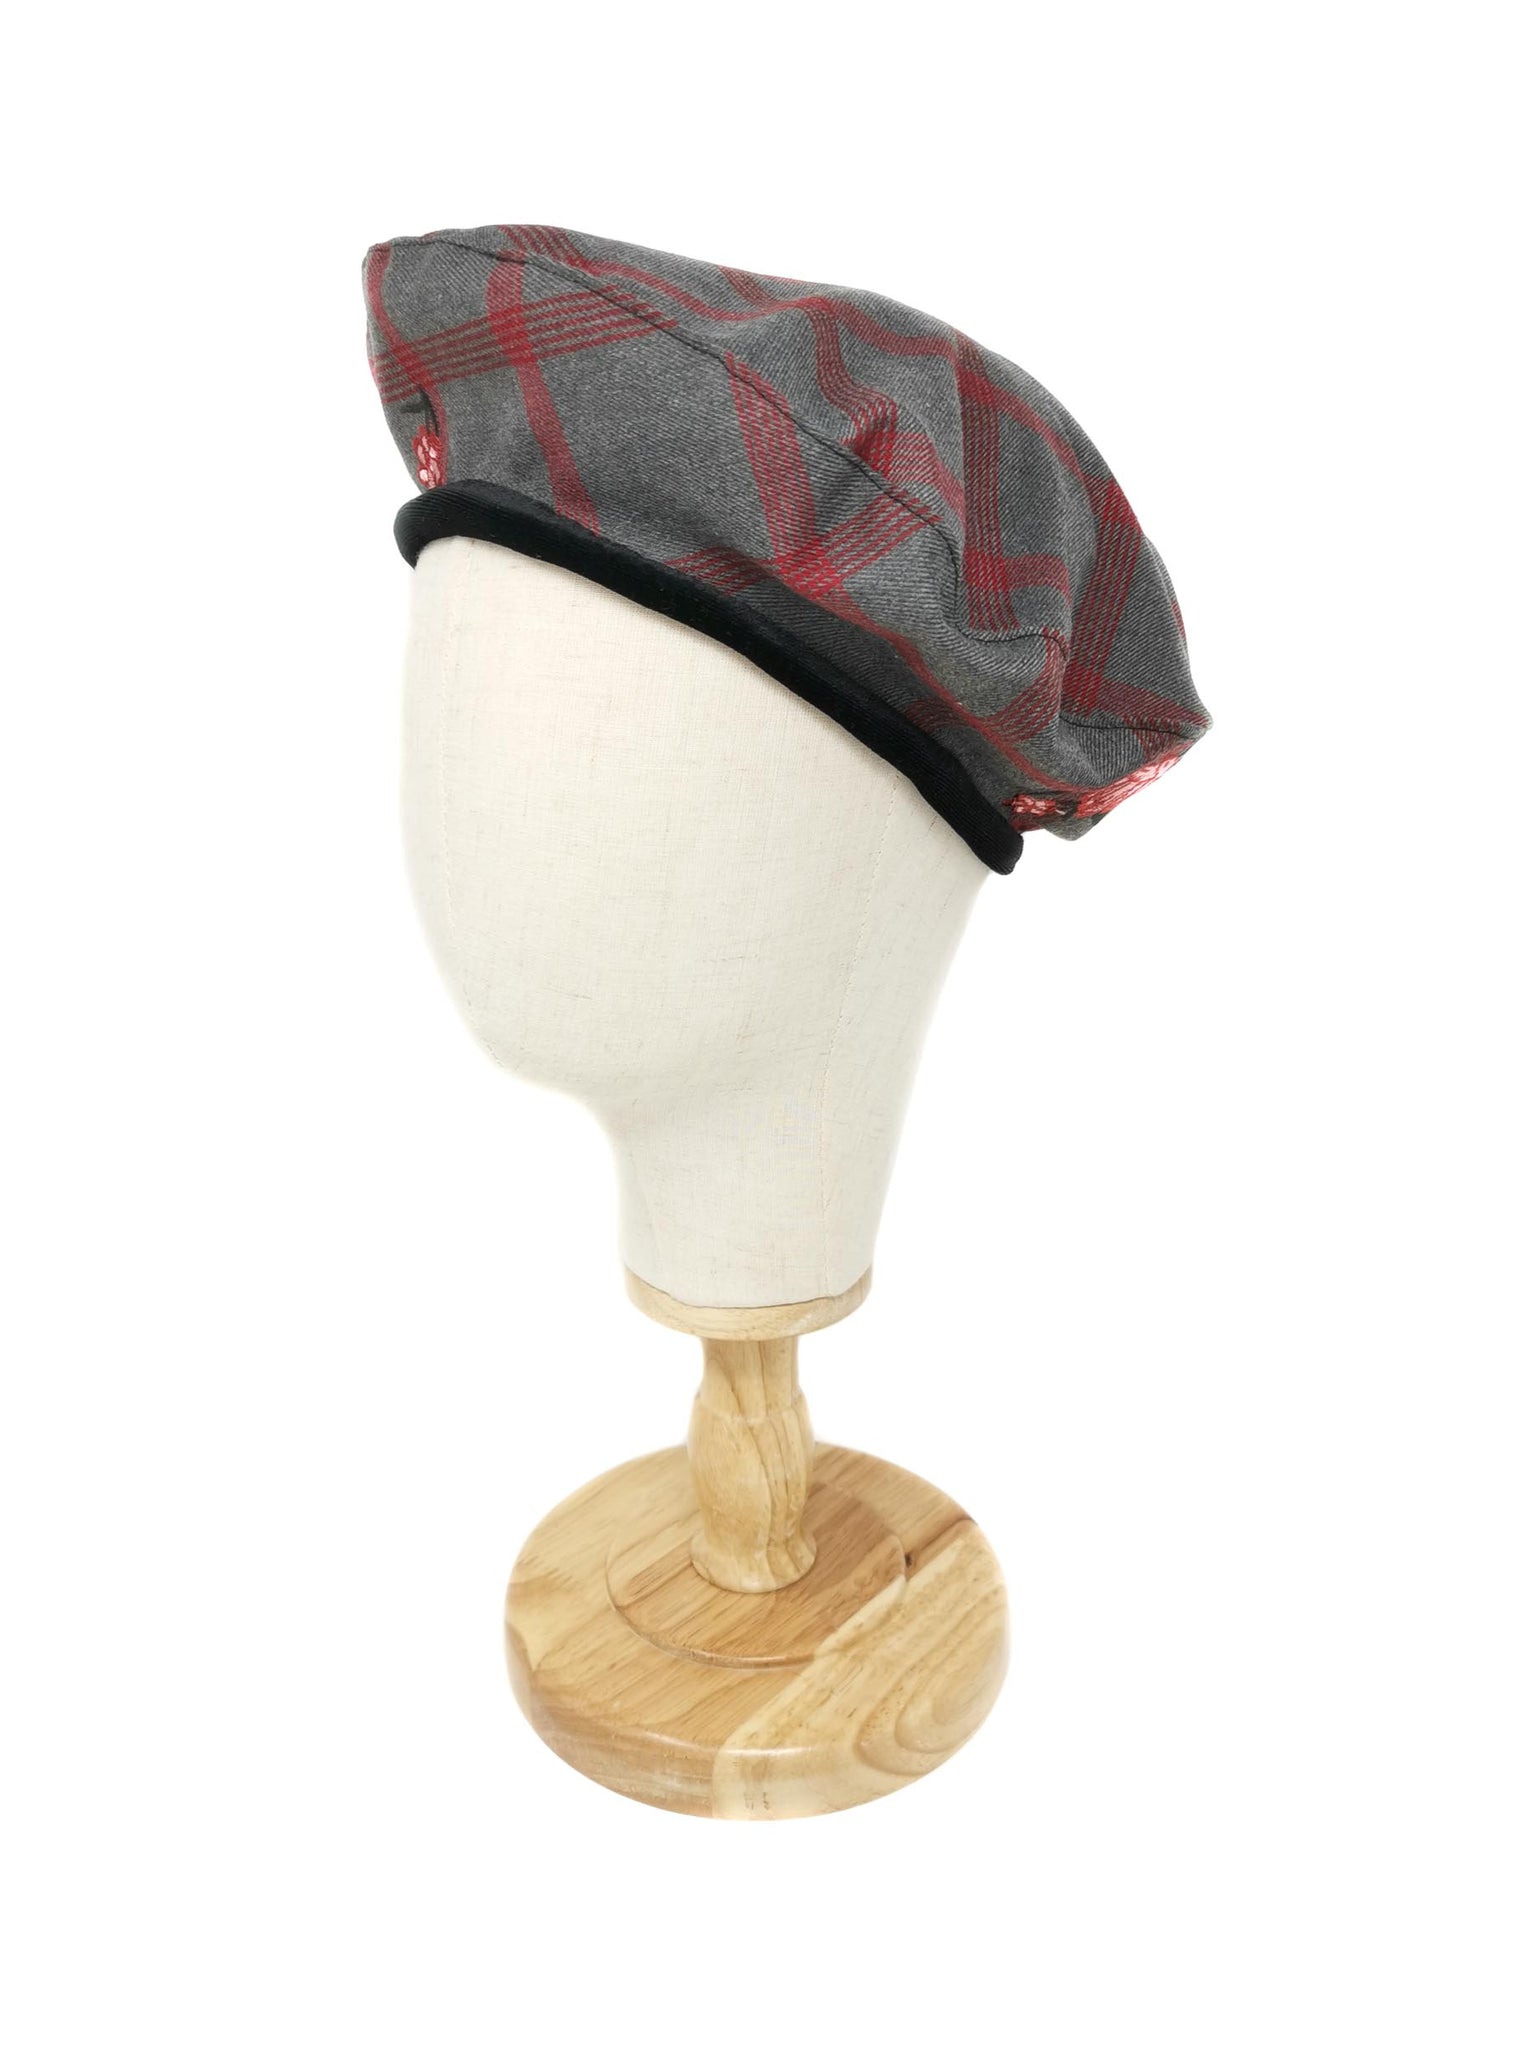 Grey and red tartan wool beret with embroidered cotton flowers